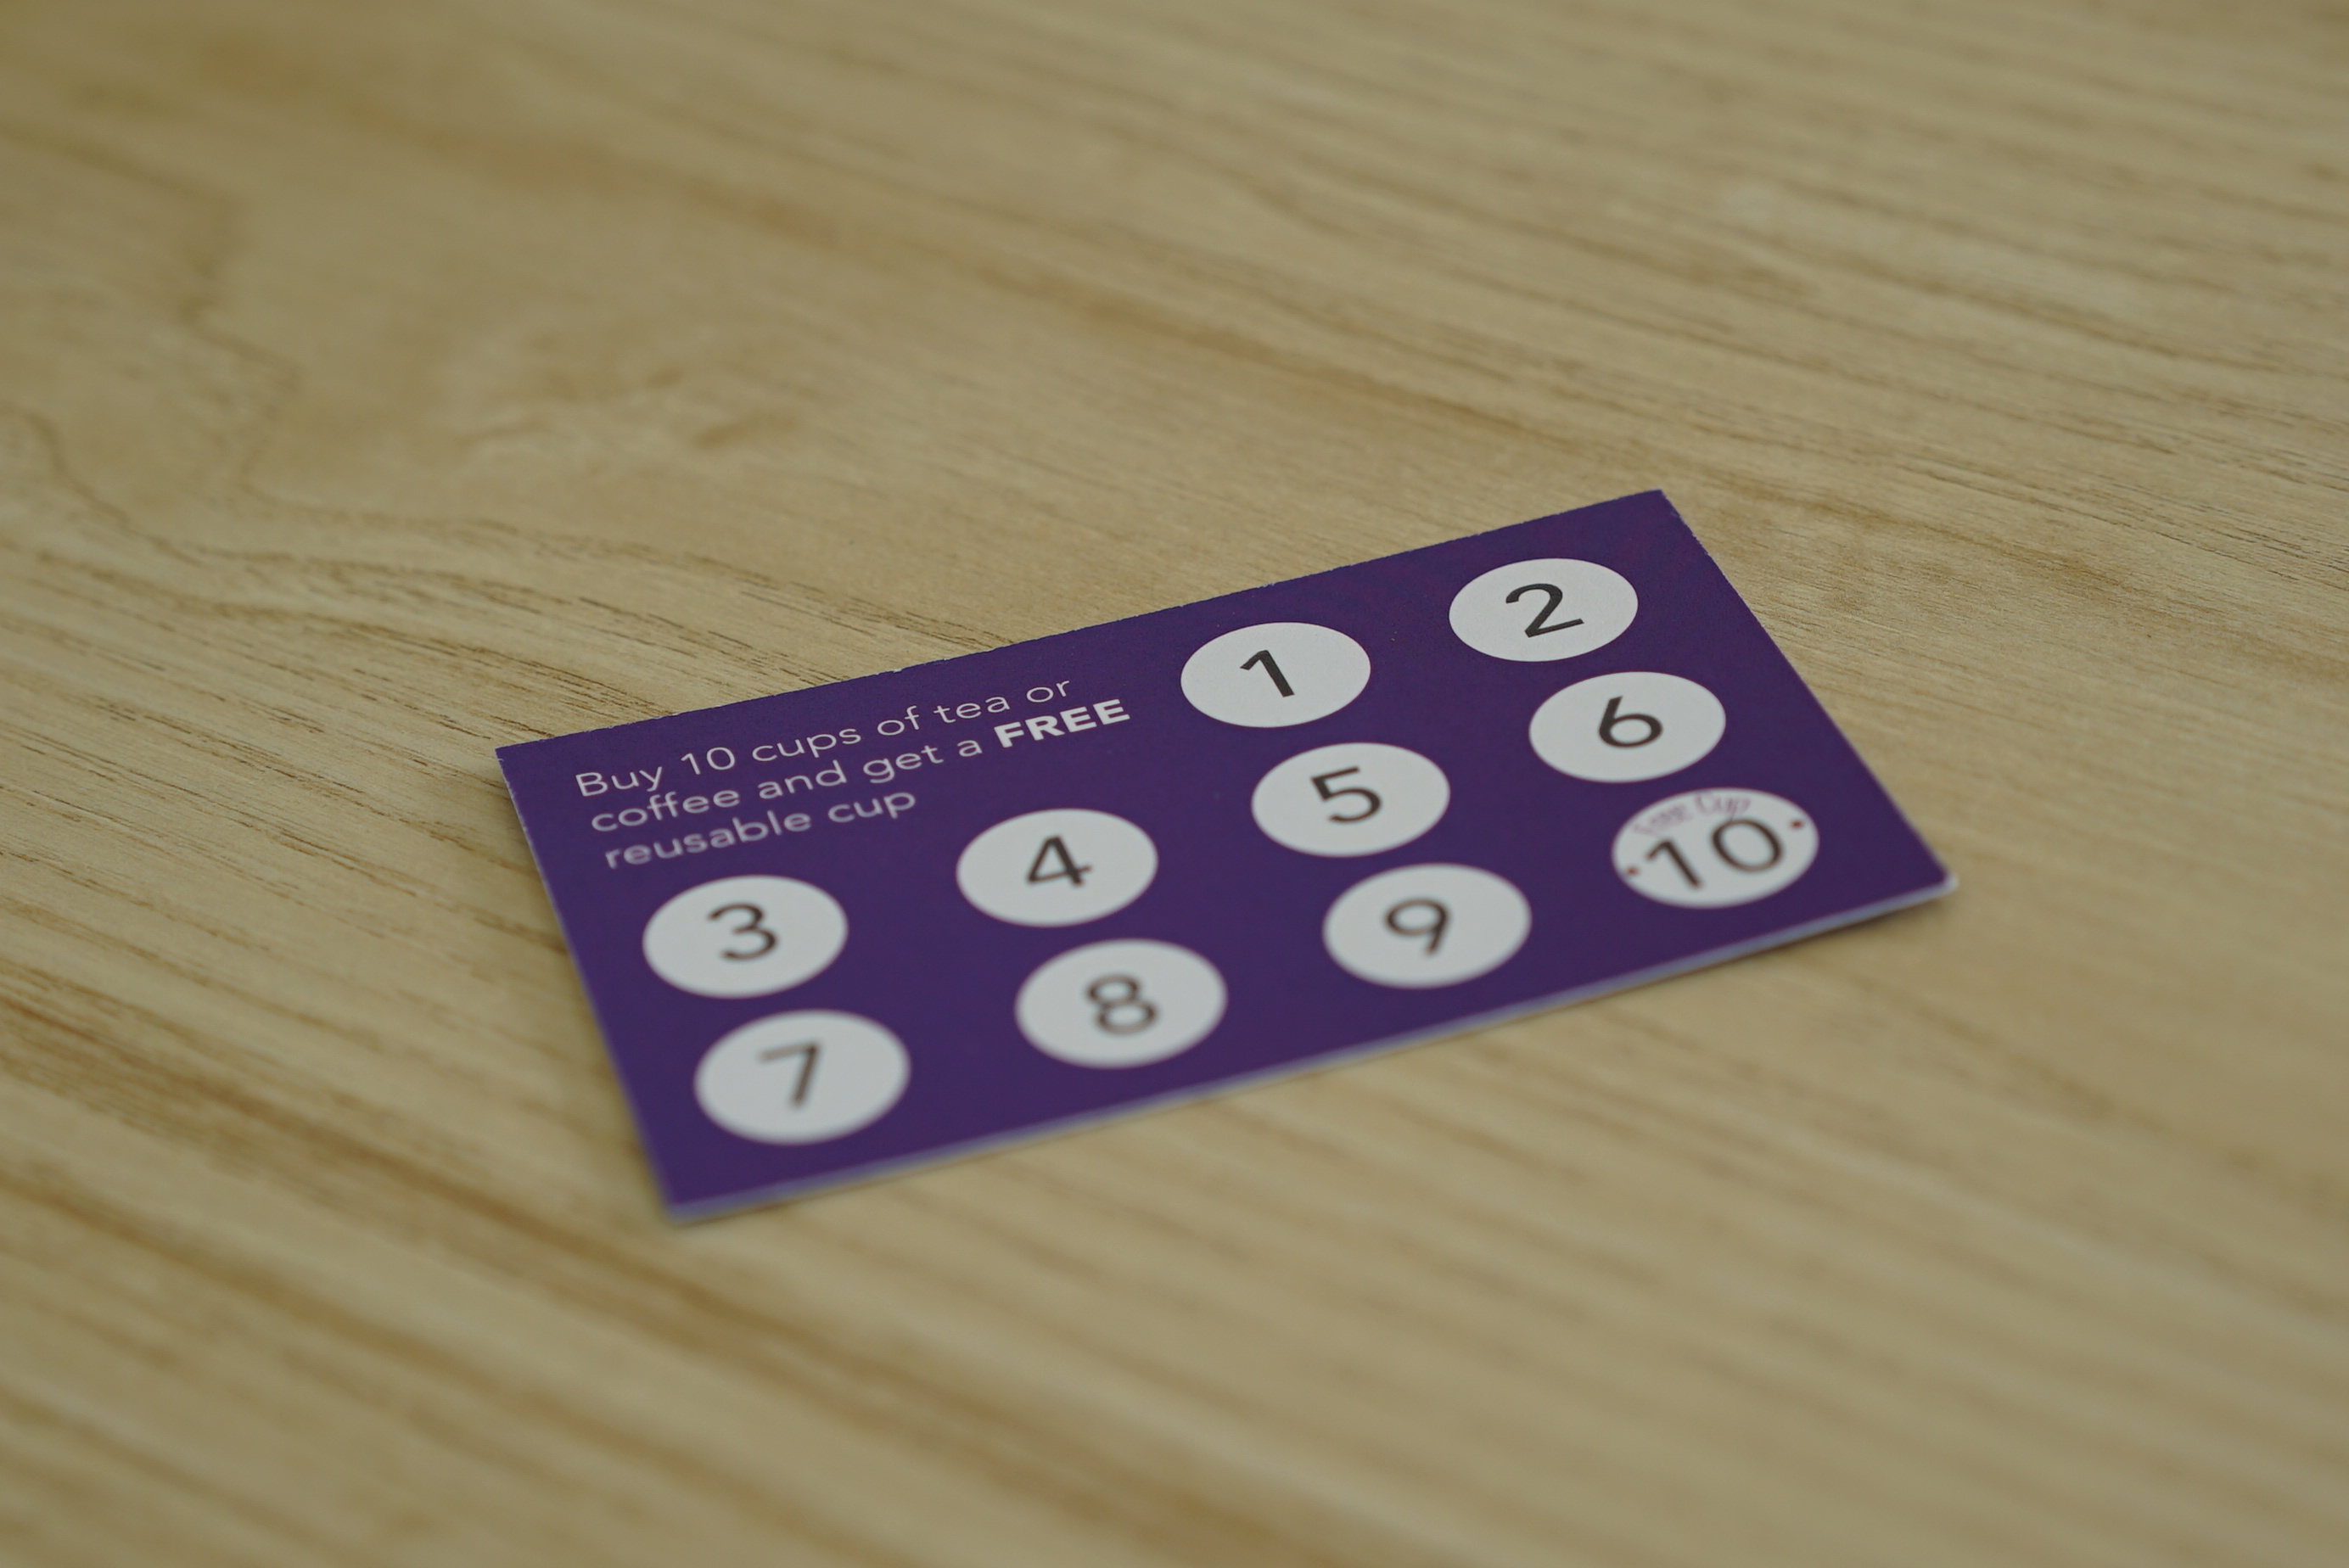 5-creative-ideas-for-loyalty-cards-kaizen-print-inspire-support